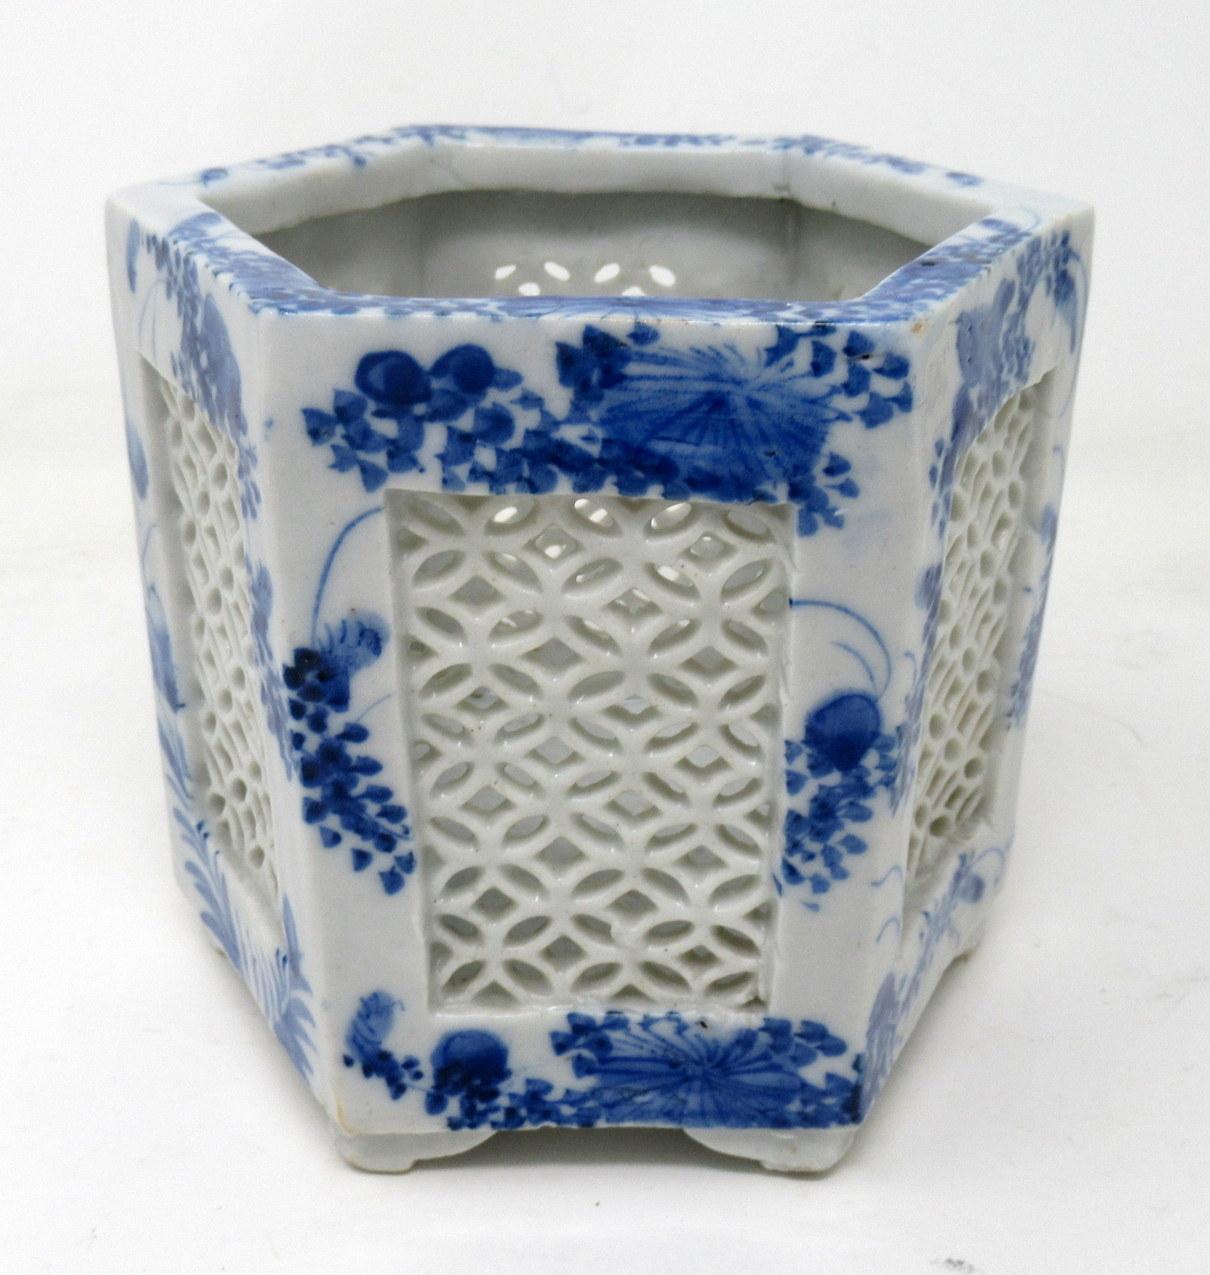 reticulated porcelain